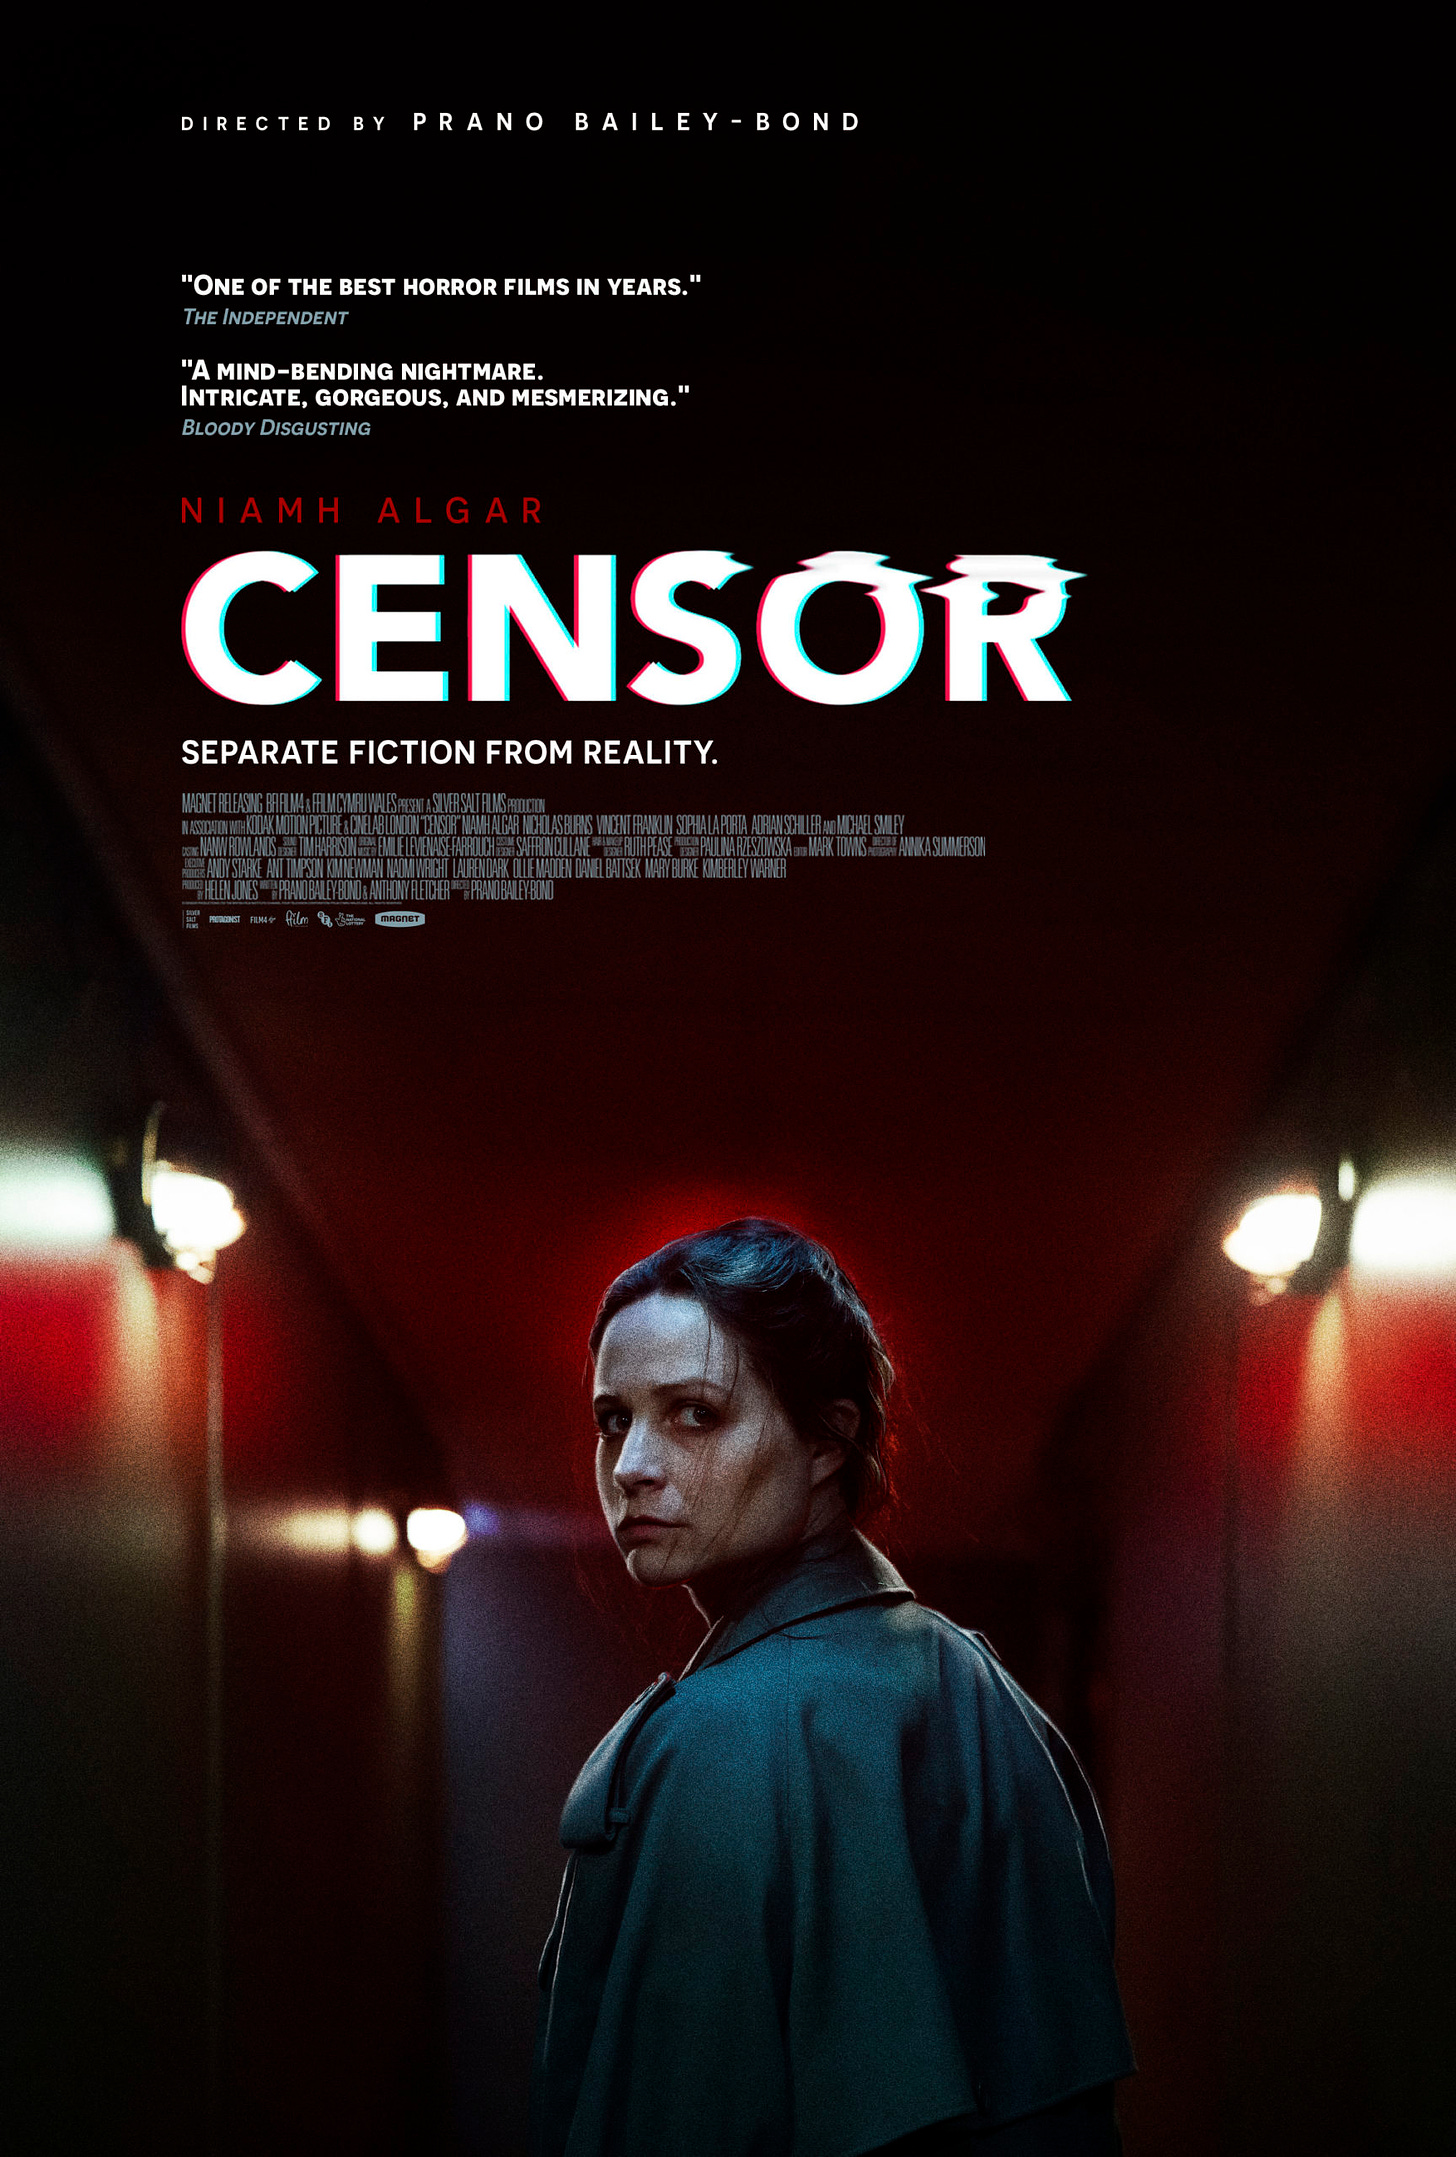 Censor&#39; Gets an Alternate Poster That Separates Fiction From Reality  [Exclusive] - Bloody Disgusting